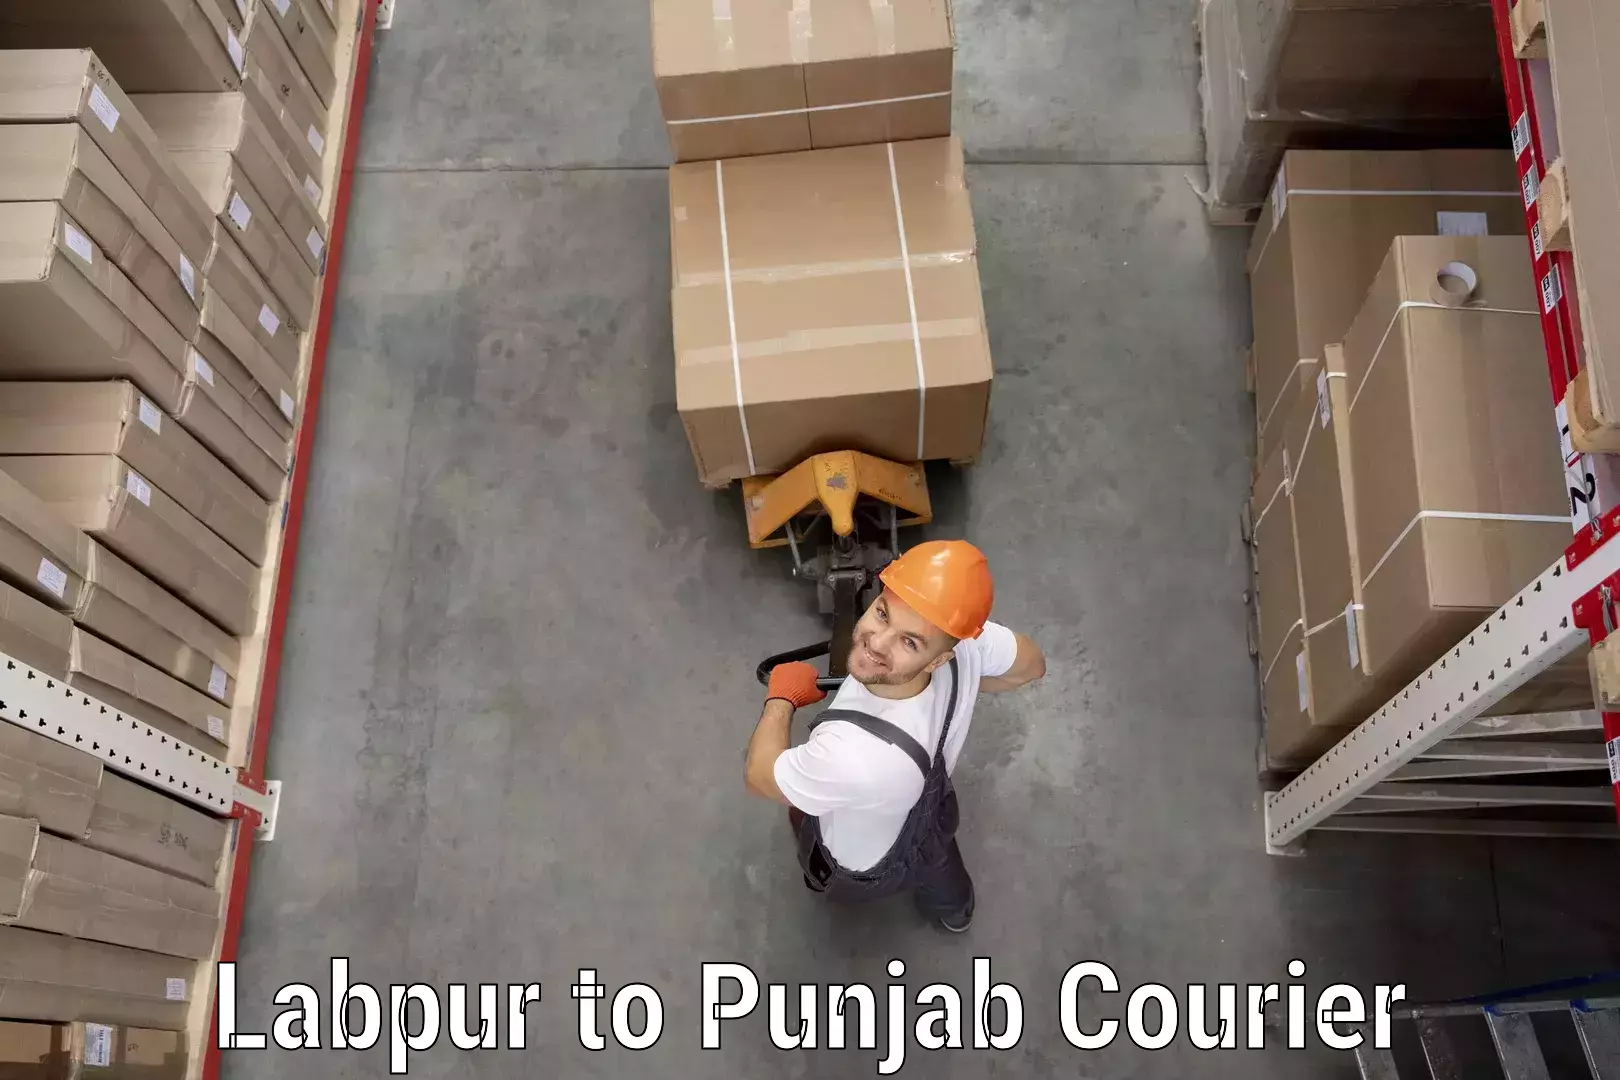 Express package delivery Labpur to Bathinda